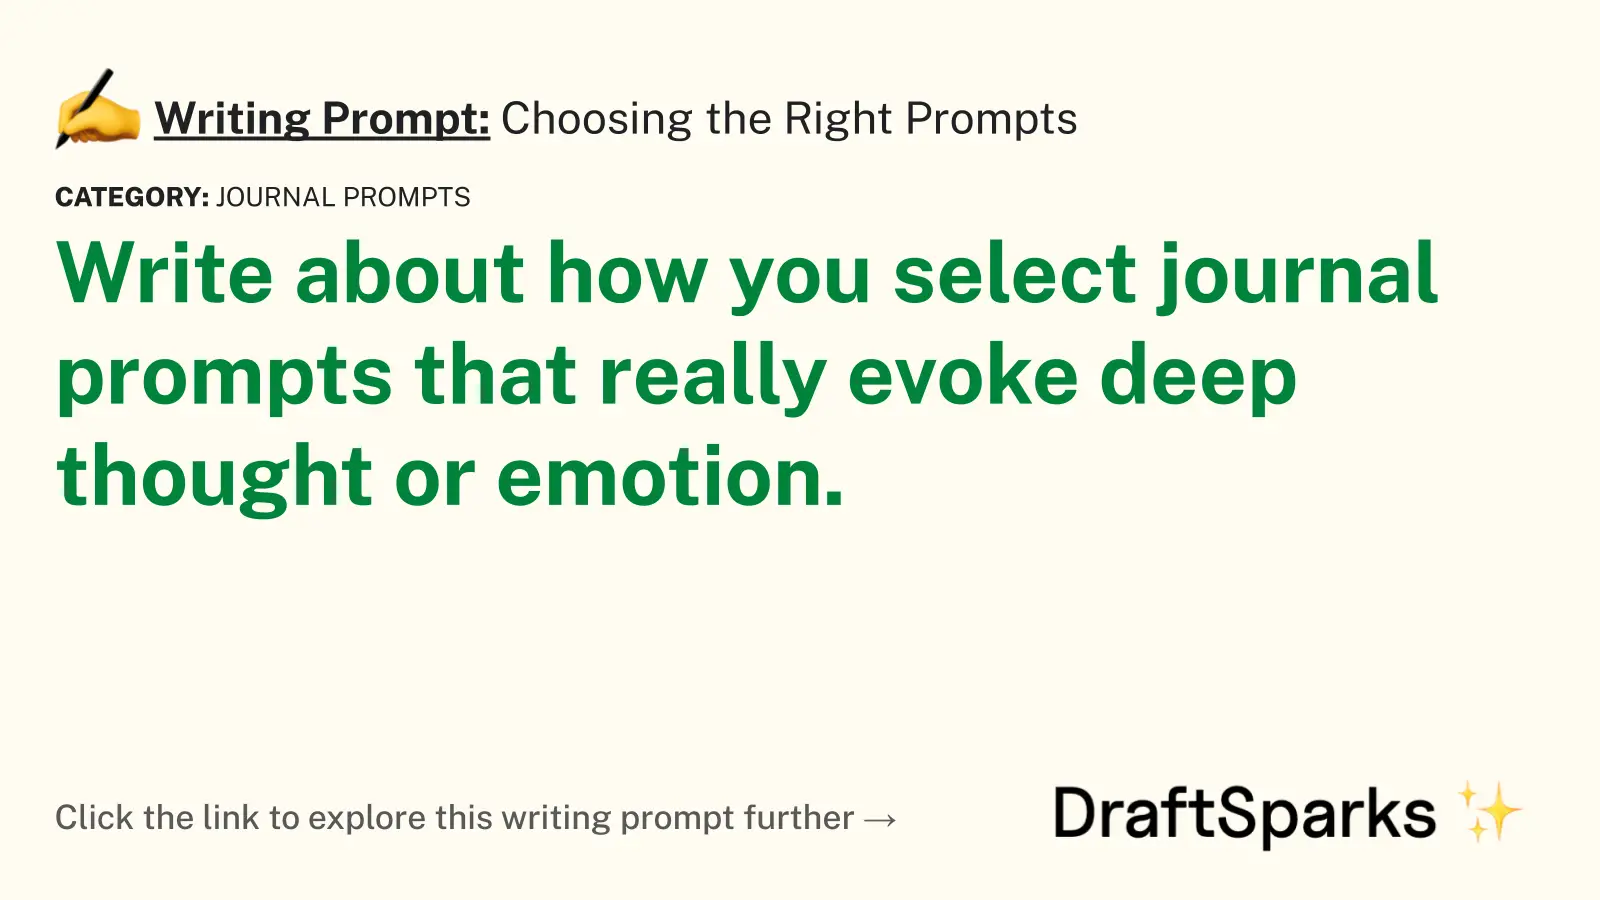 Choosing the Right Prompts